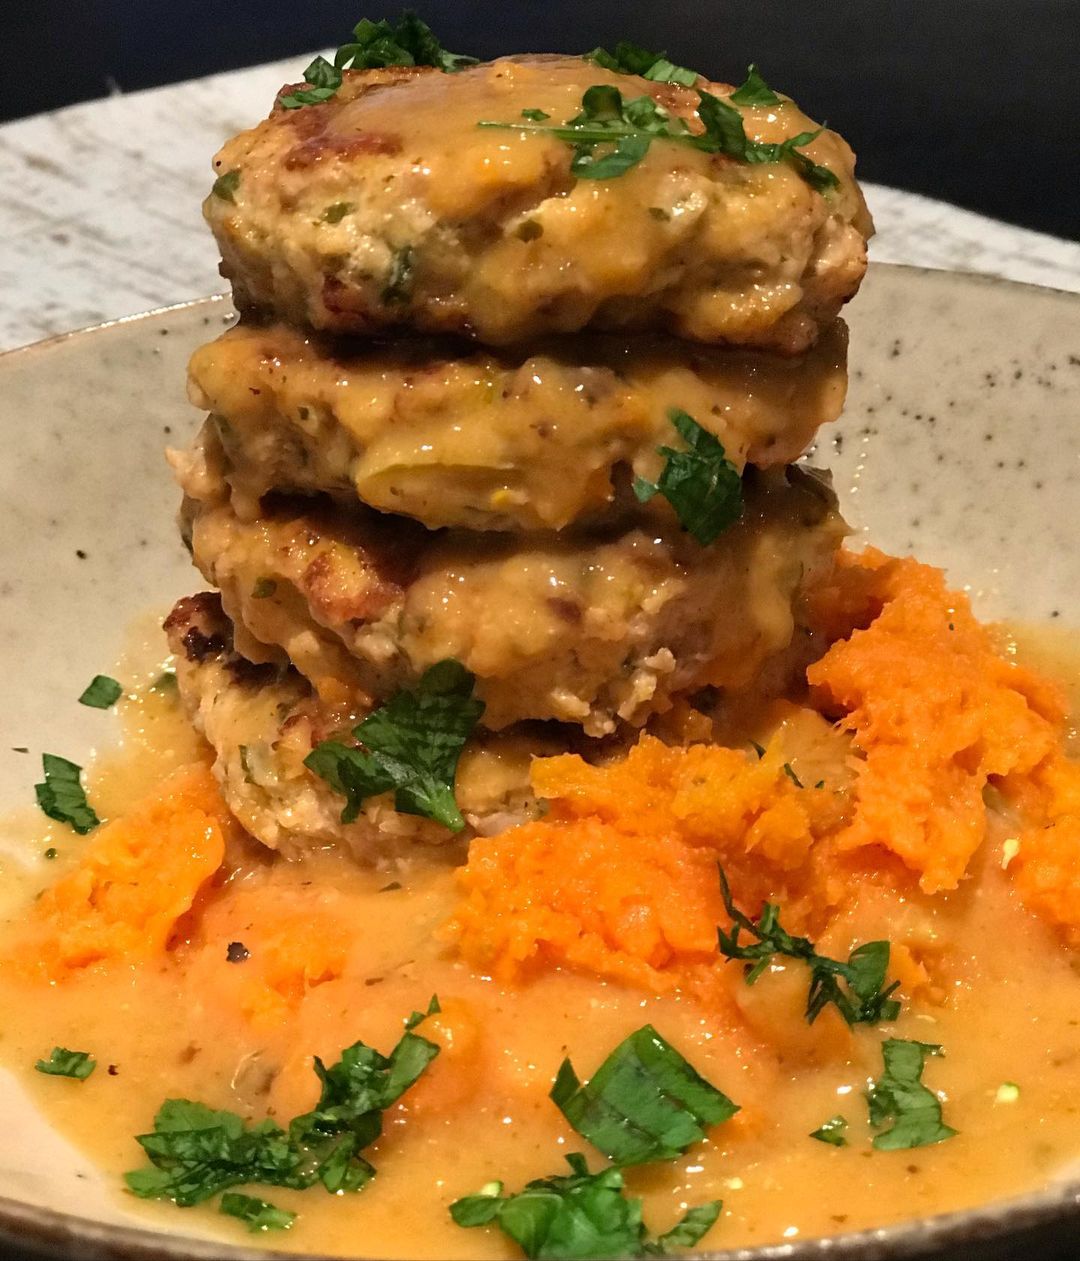 APRICOT CHICKEN RISSOLES Been craving apricot chicken but this somehow